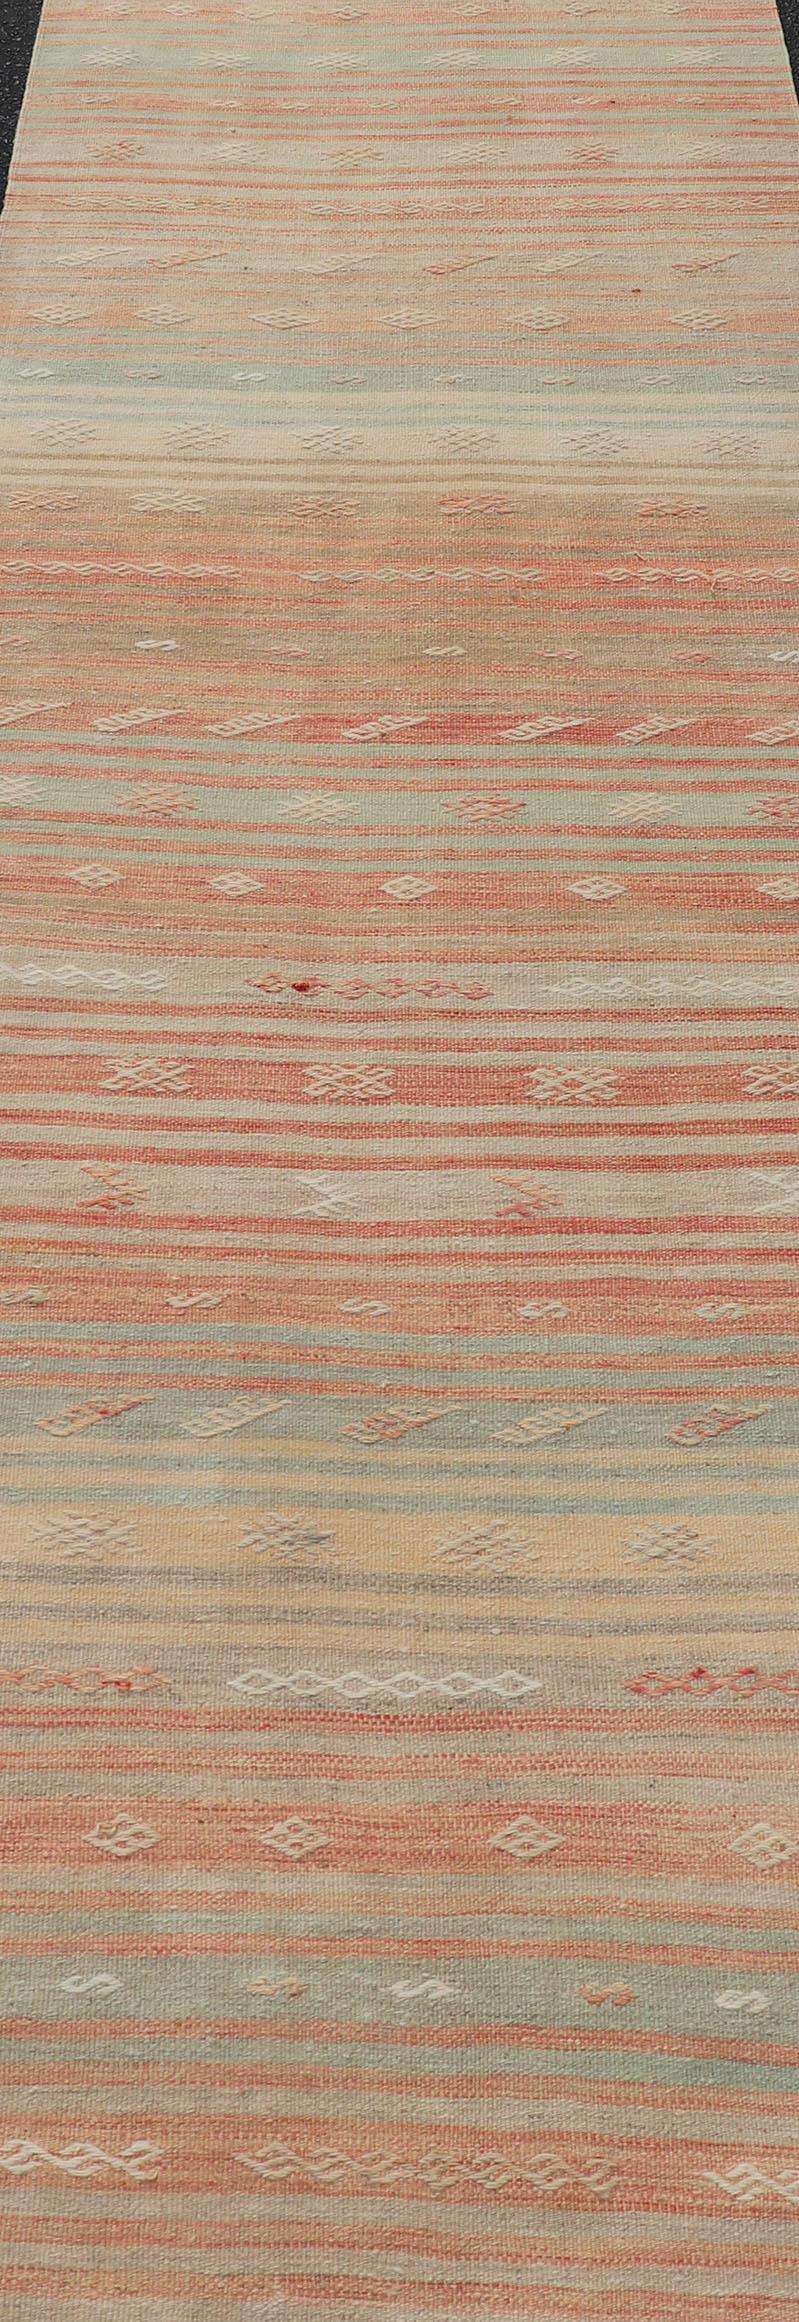 Vintage Kilim Runner with Stripes and Geometric Tribal Motifs in Light Tones For Sale 1